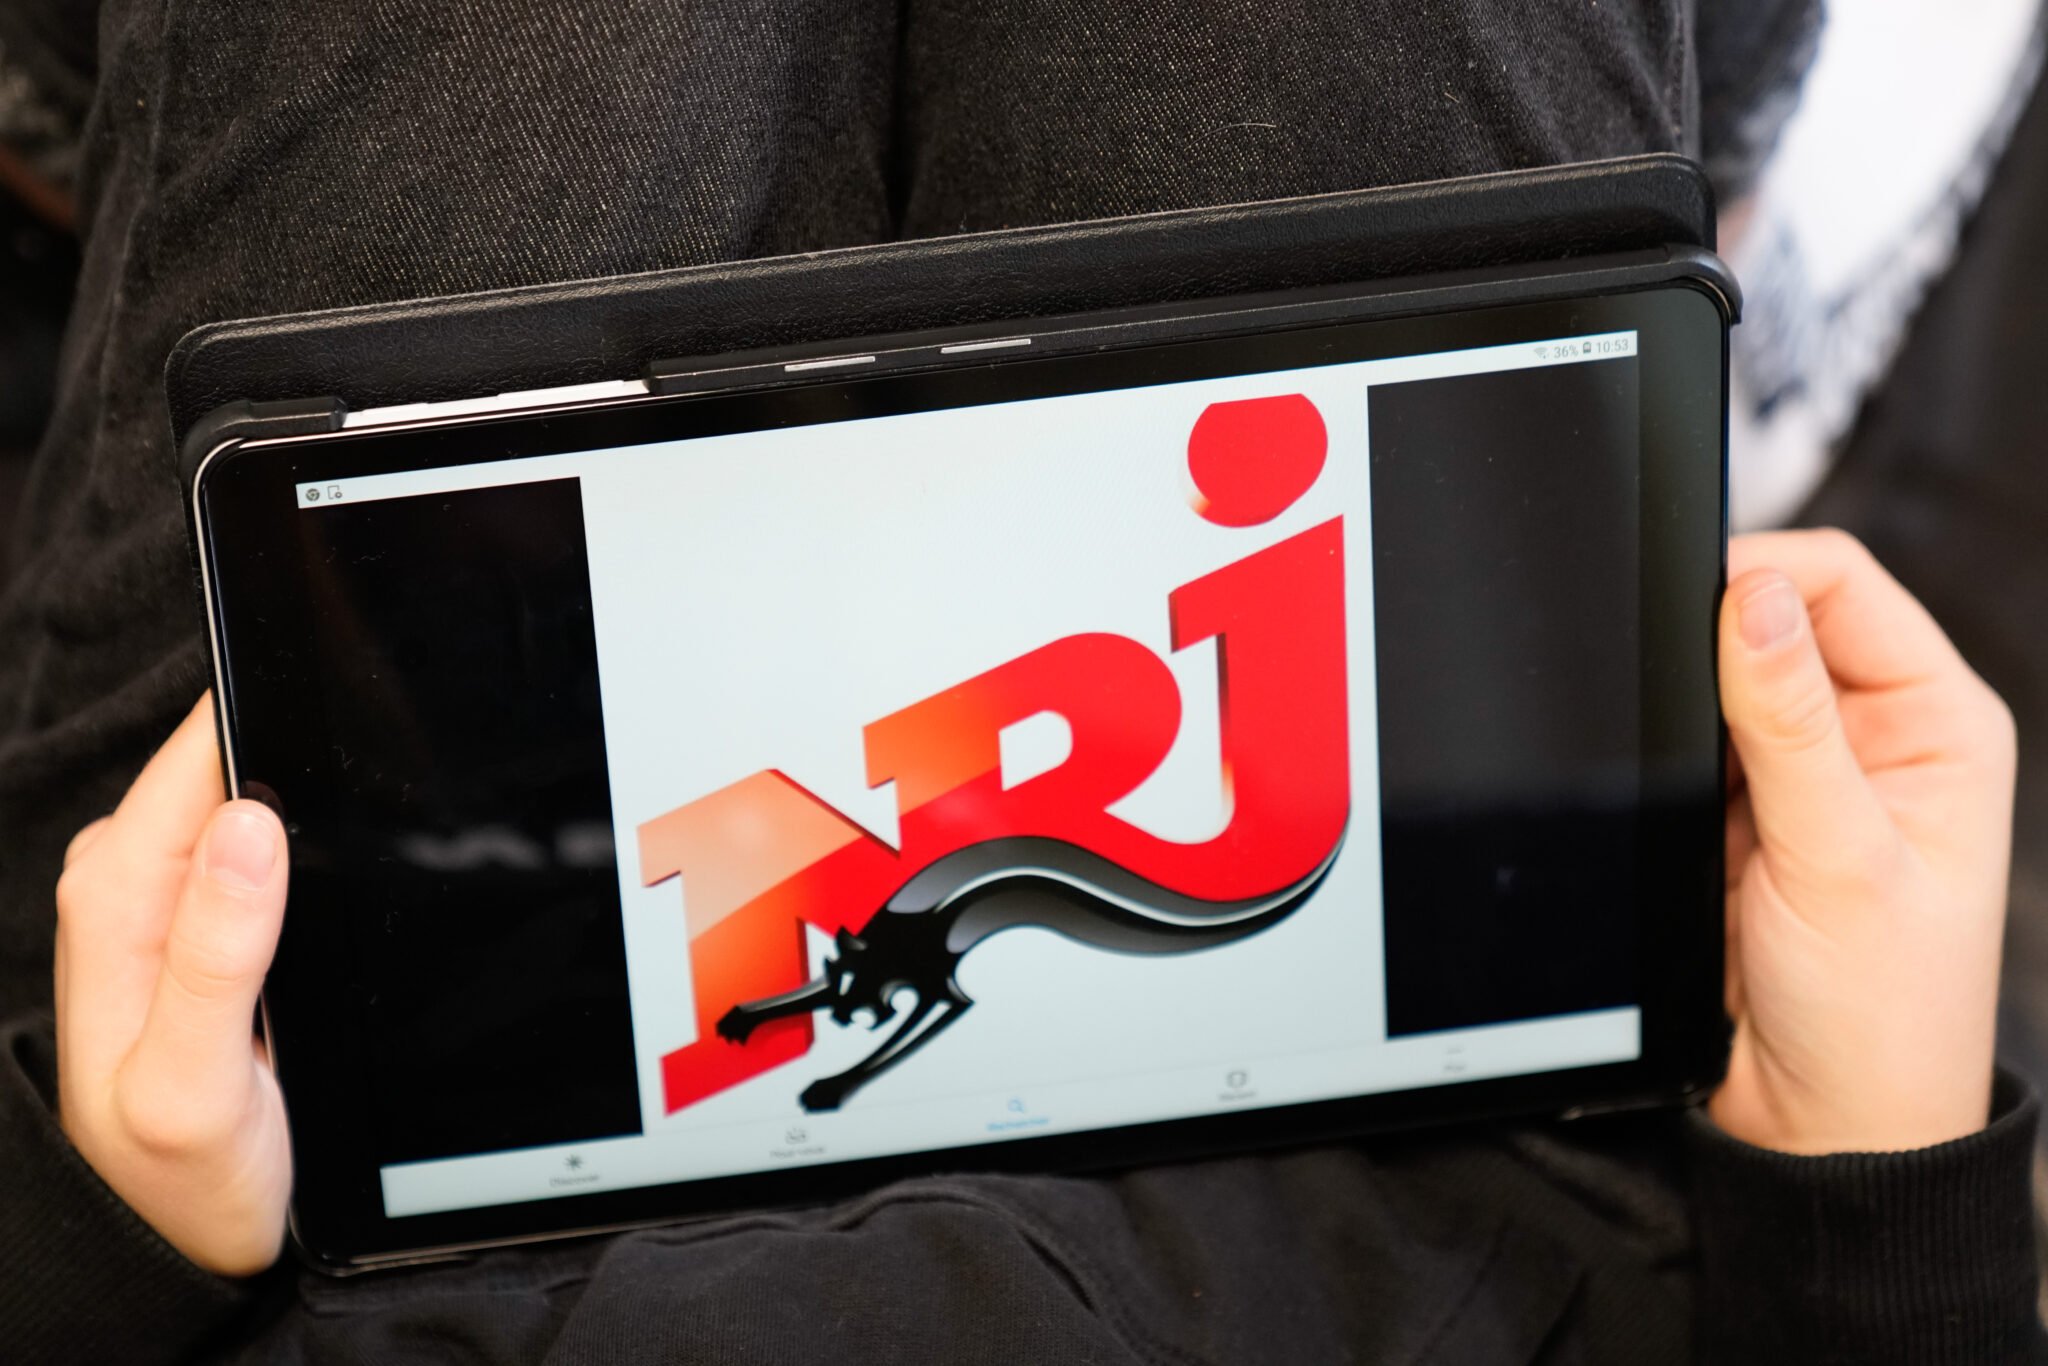 Bordeaux , Aquitaine / France - 11 25 2019 : nrj sign logo screen tablet private French radio station